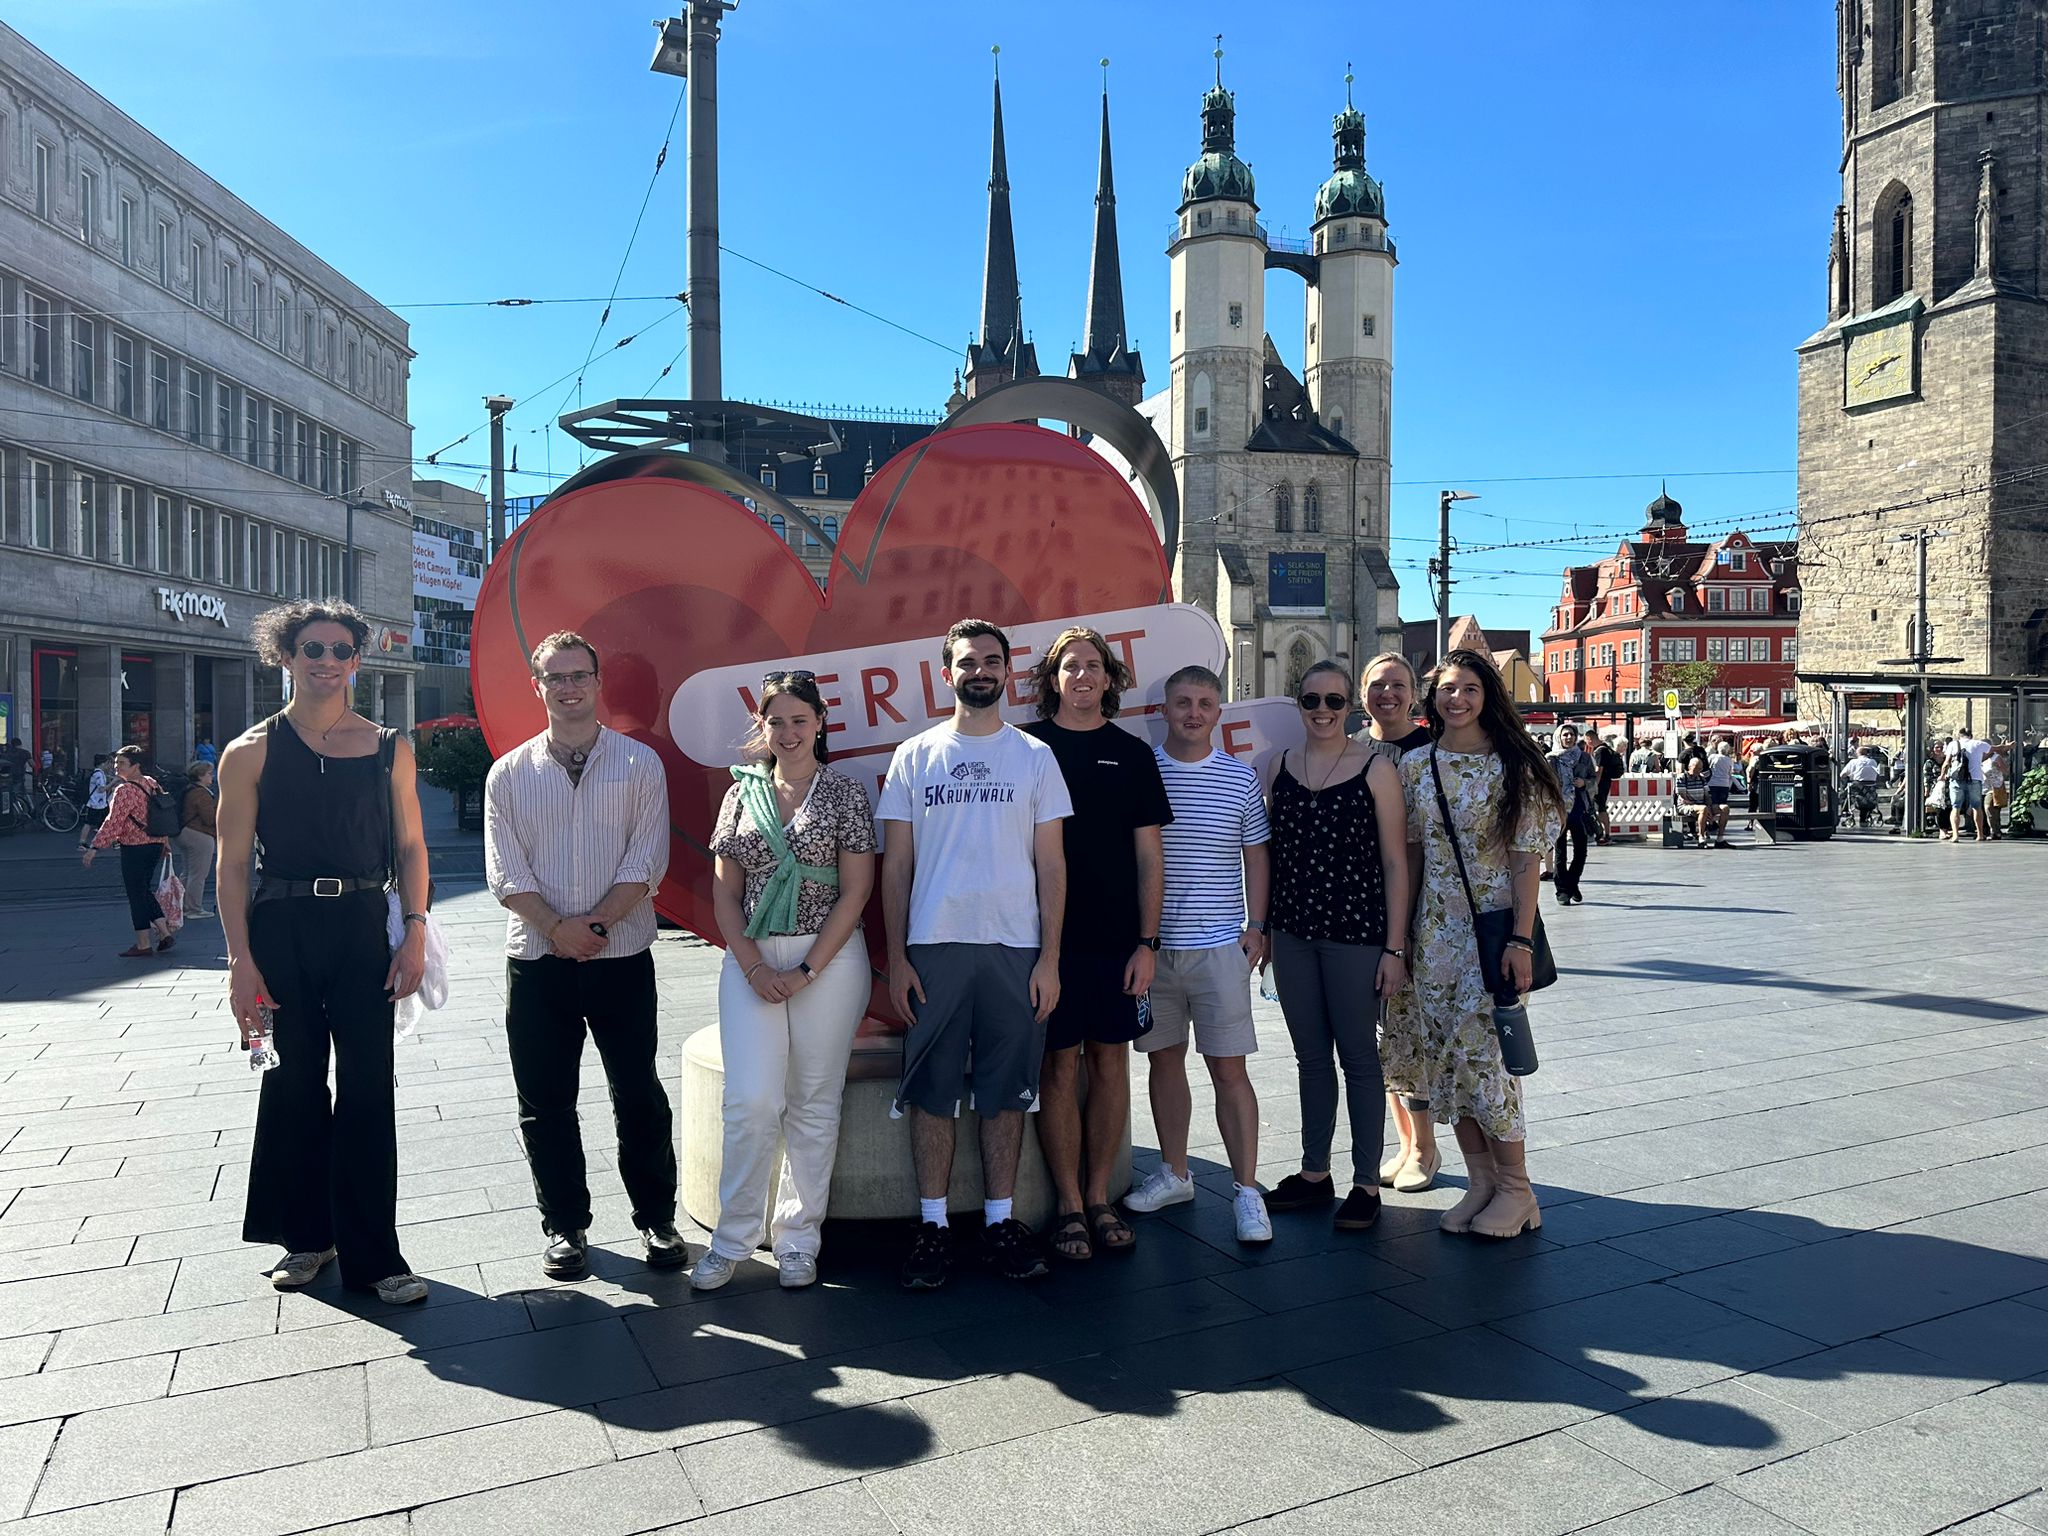 A group tour of the city of Halle